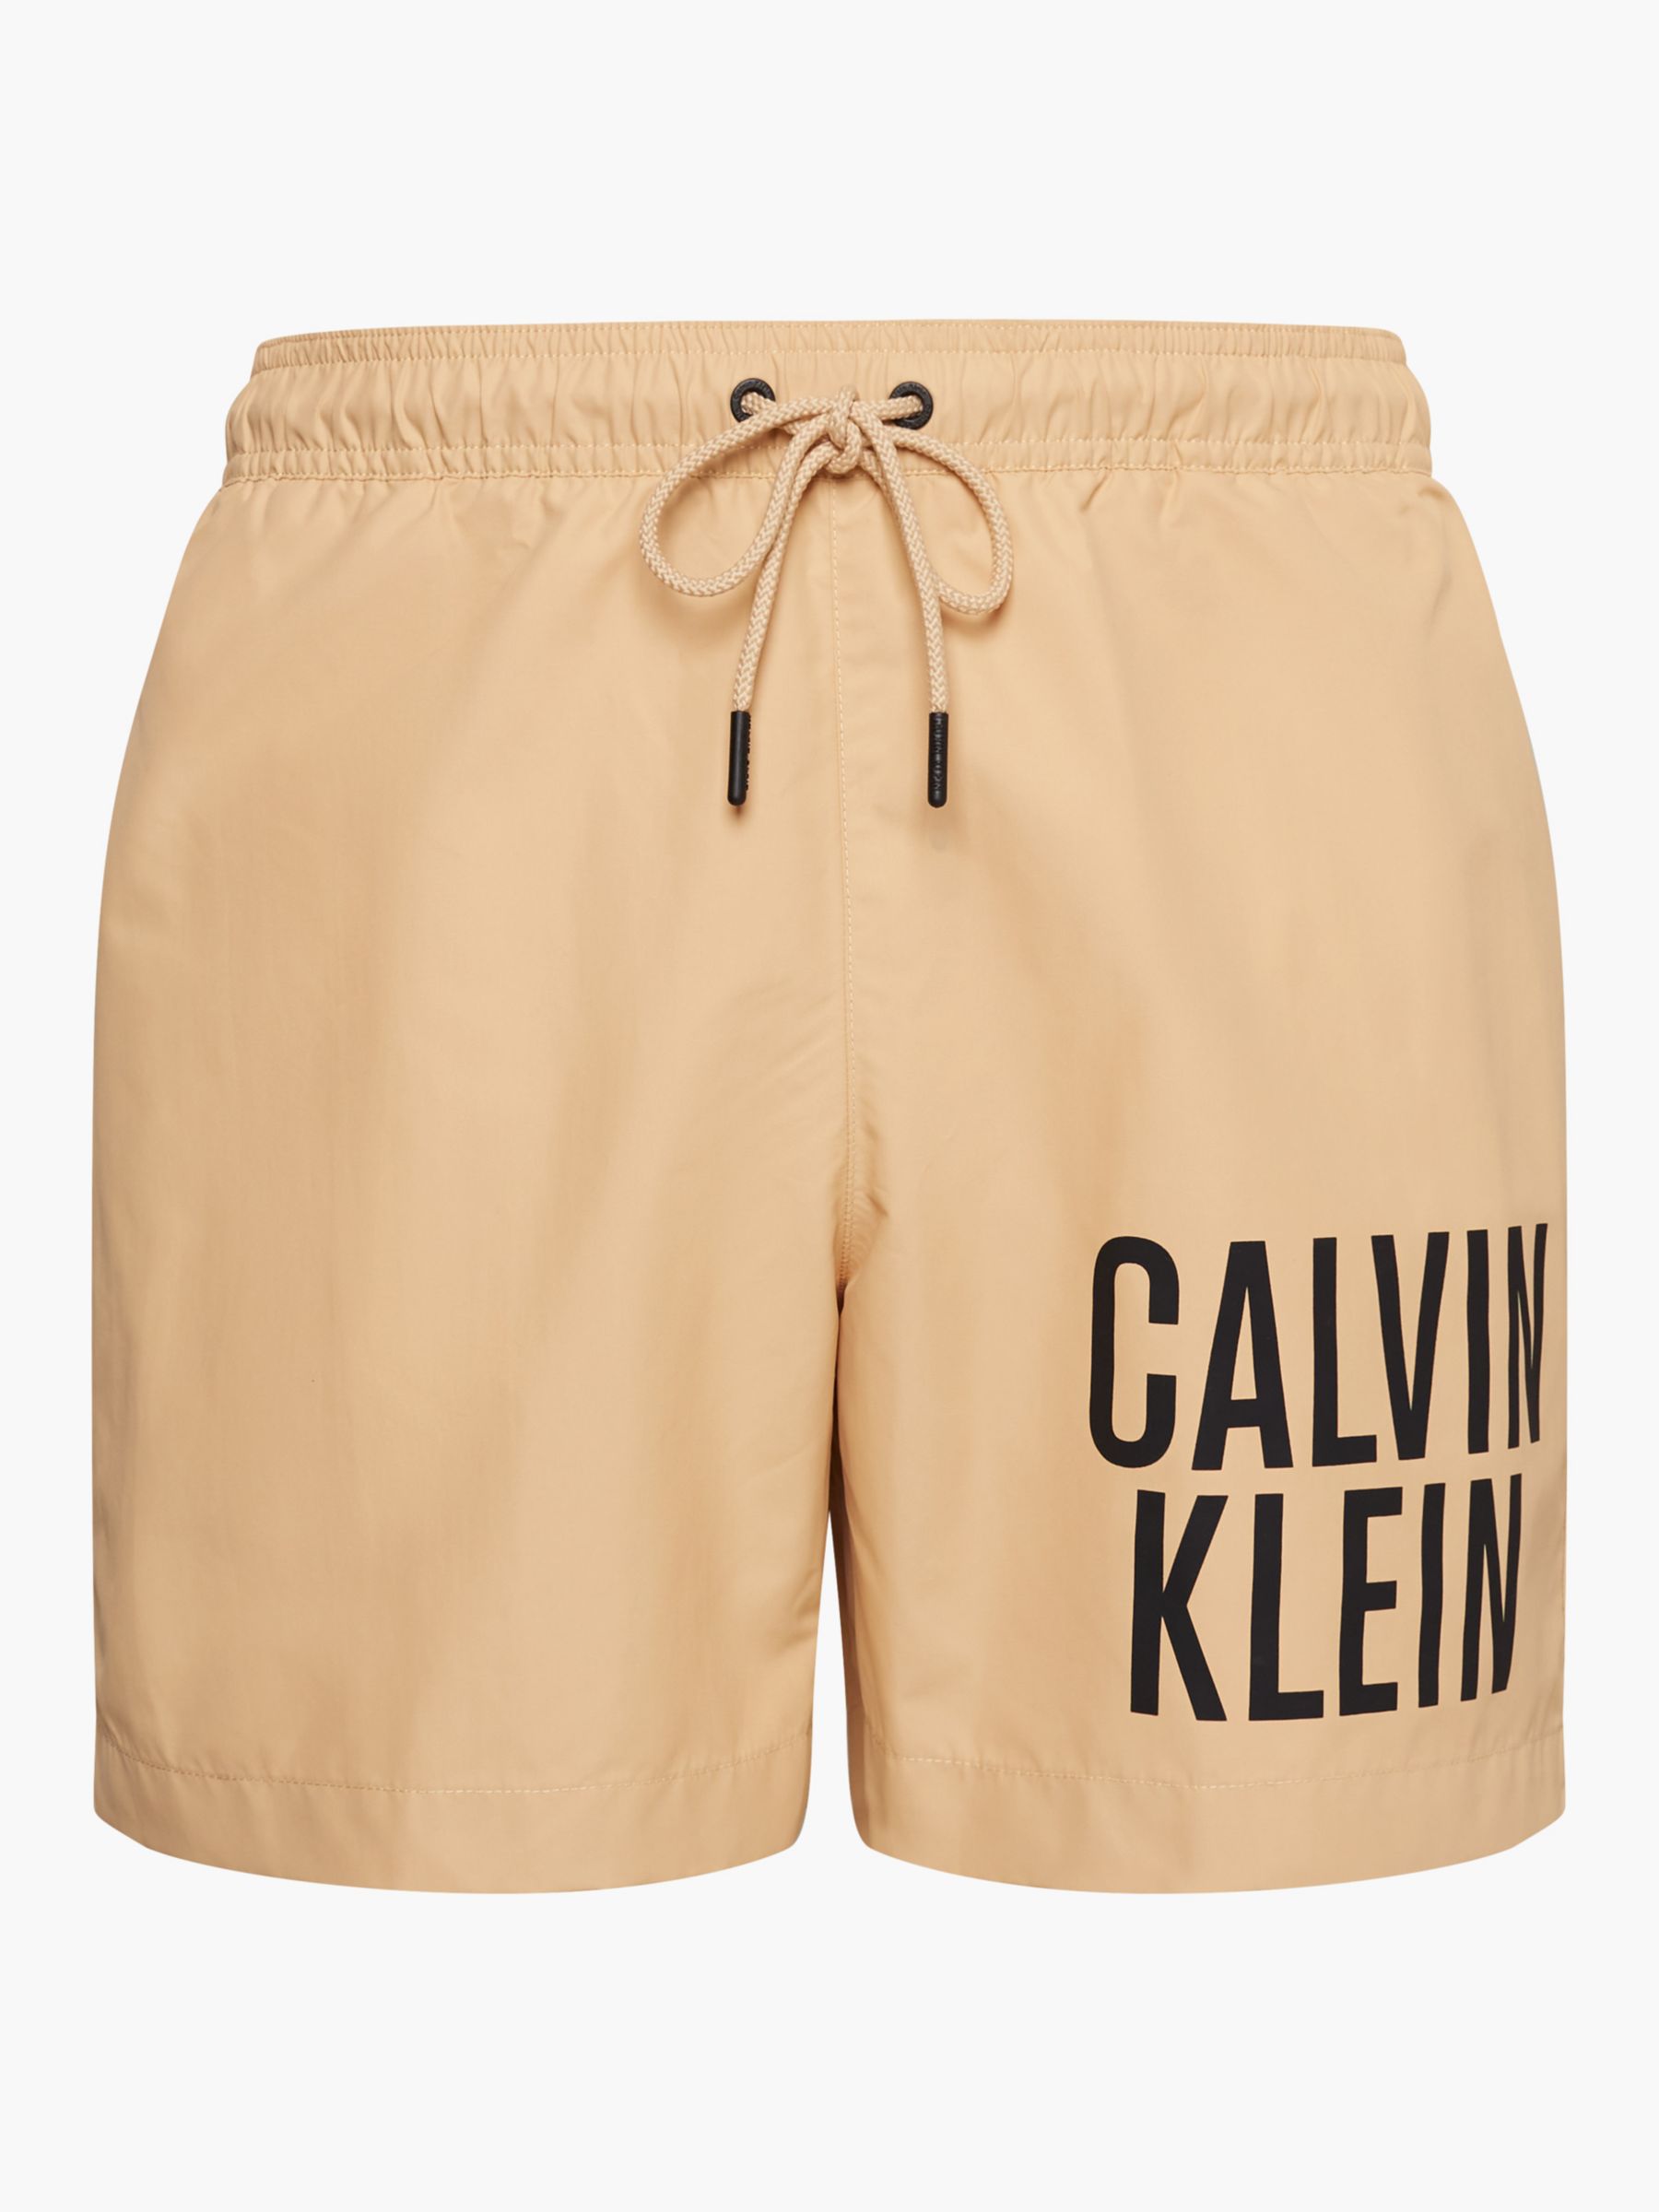 Buy Calvin Klein Intense Power Recycled Poly Swim Shorts, Sunday Pastry Online at johnlewis.com